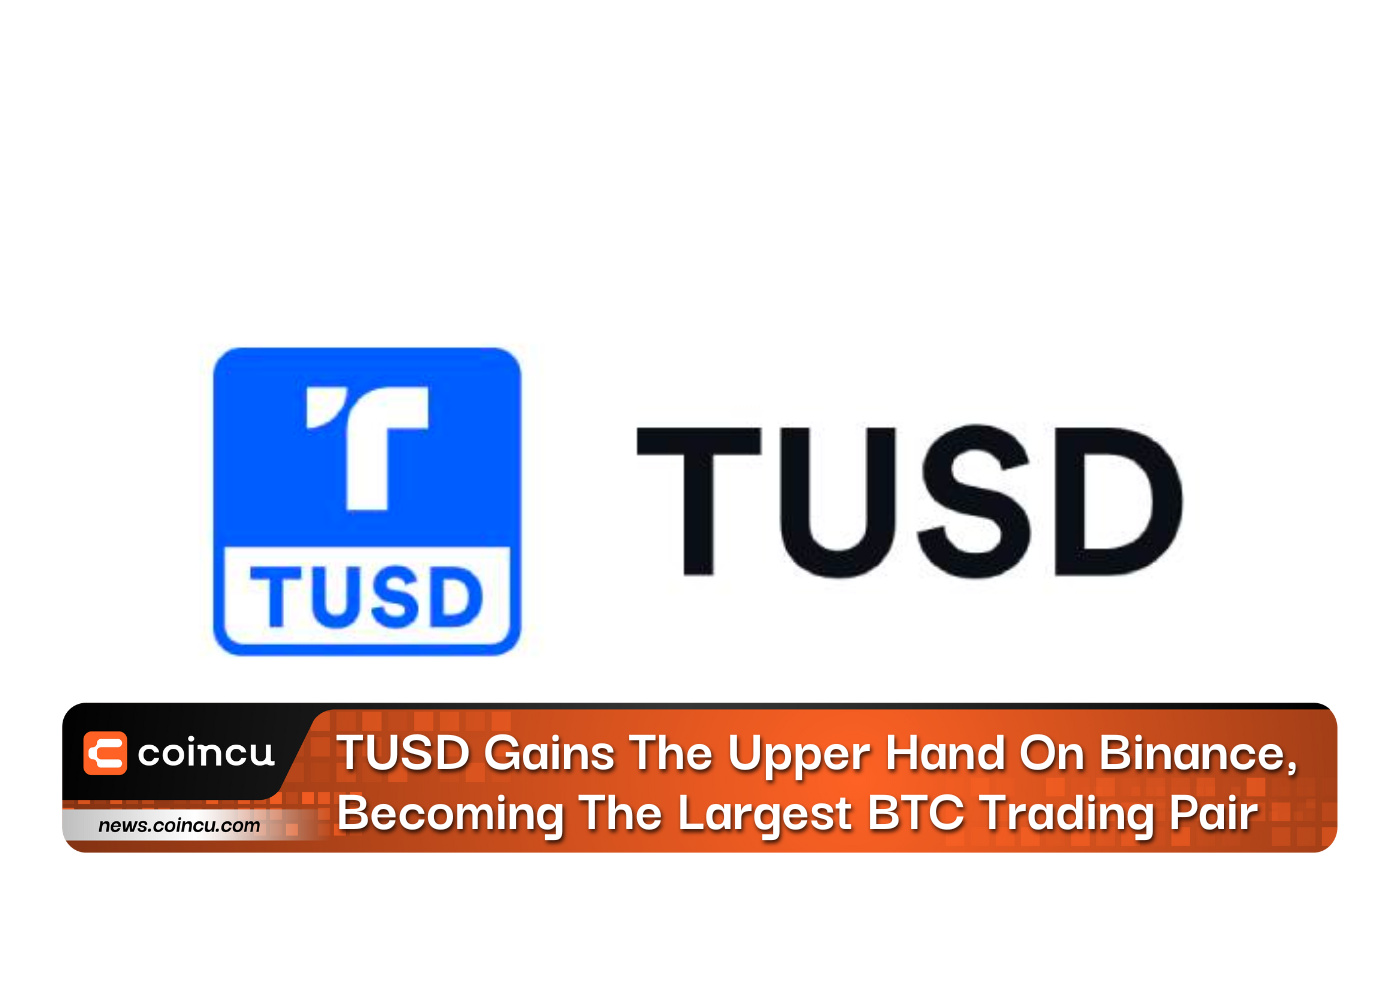 TUSD Gains The Upper Hand On Binance, Becoming The Largest BTC Trading Pair